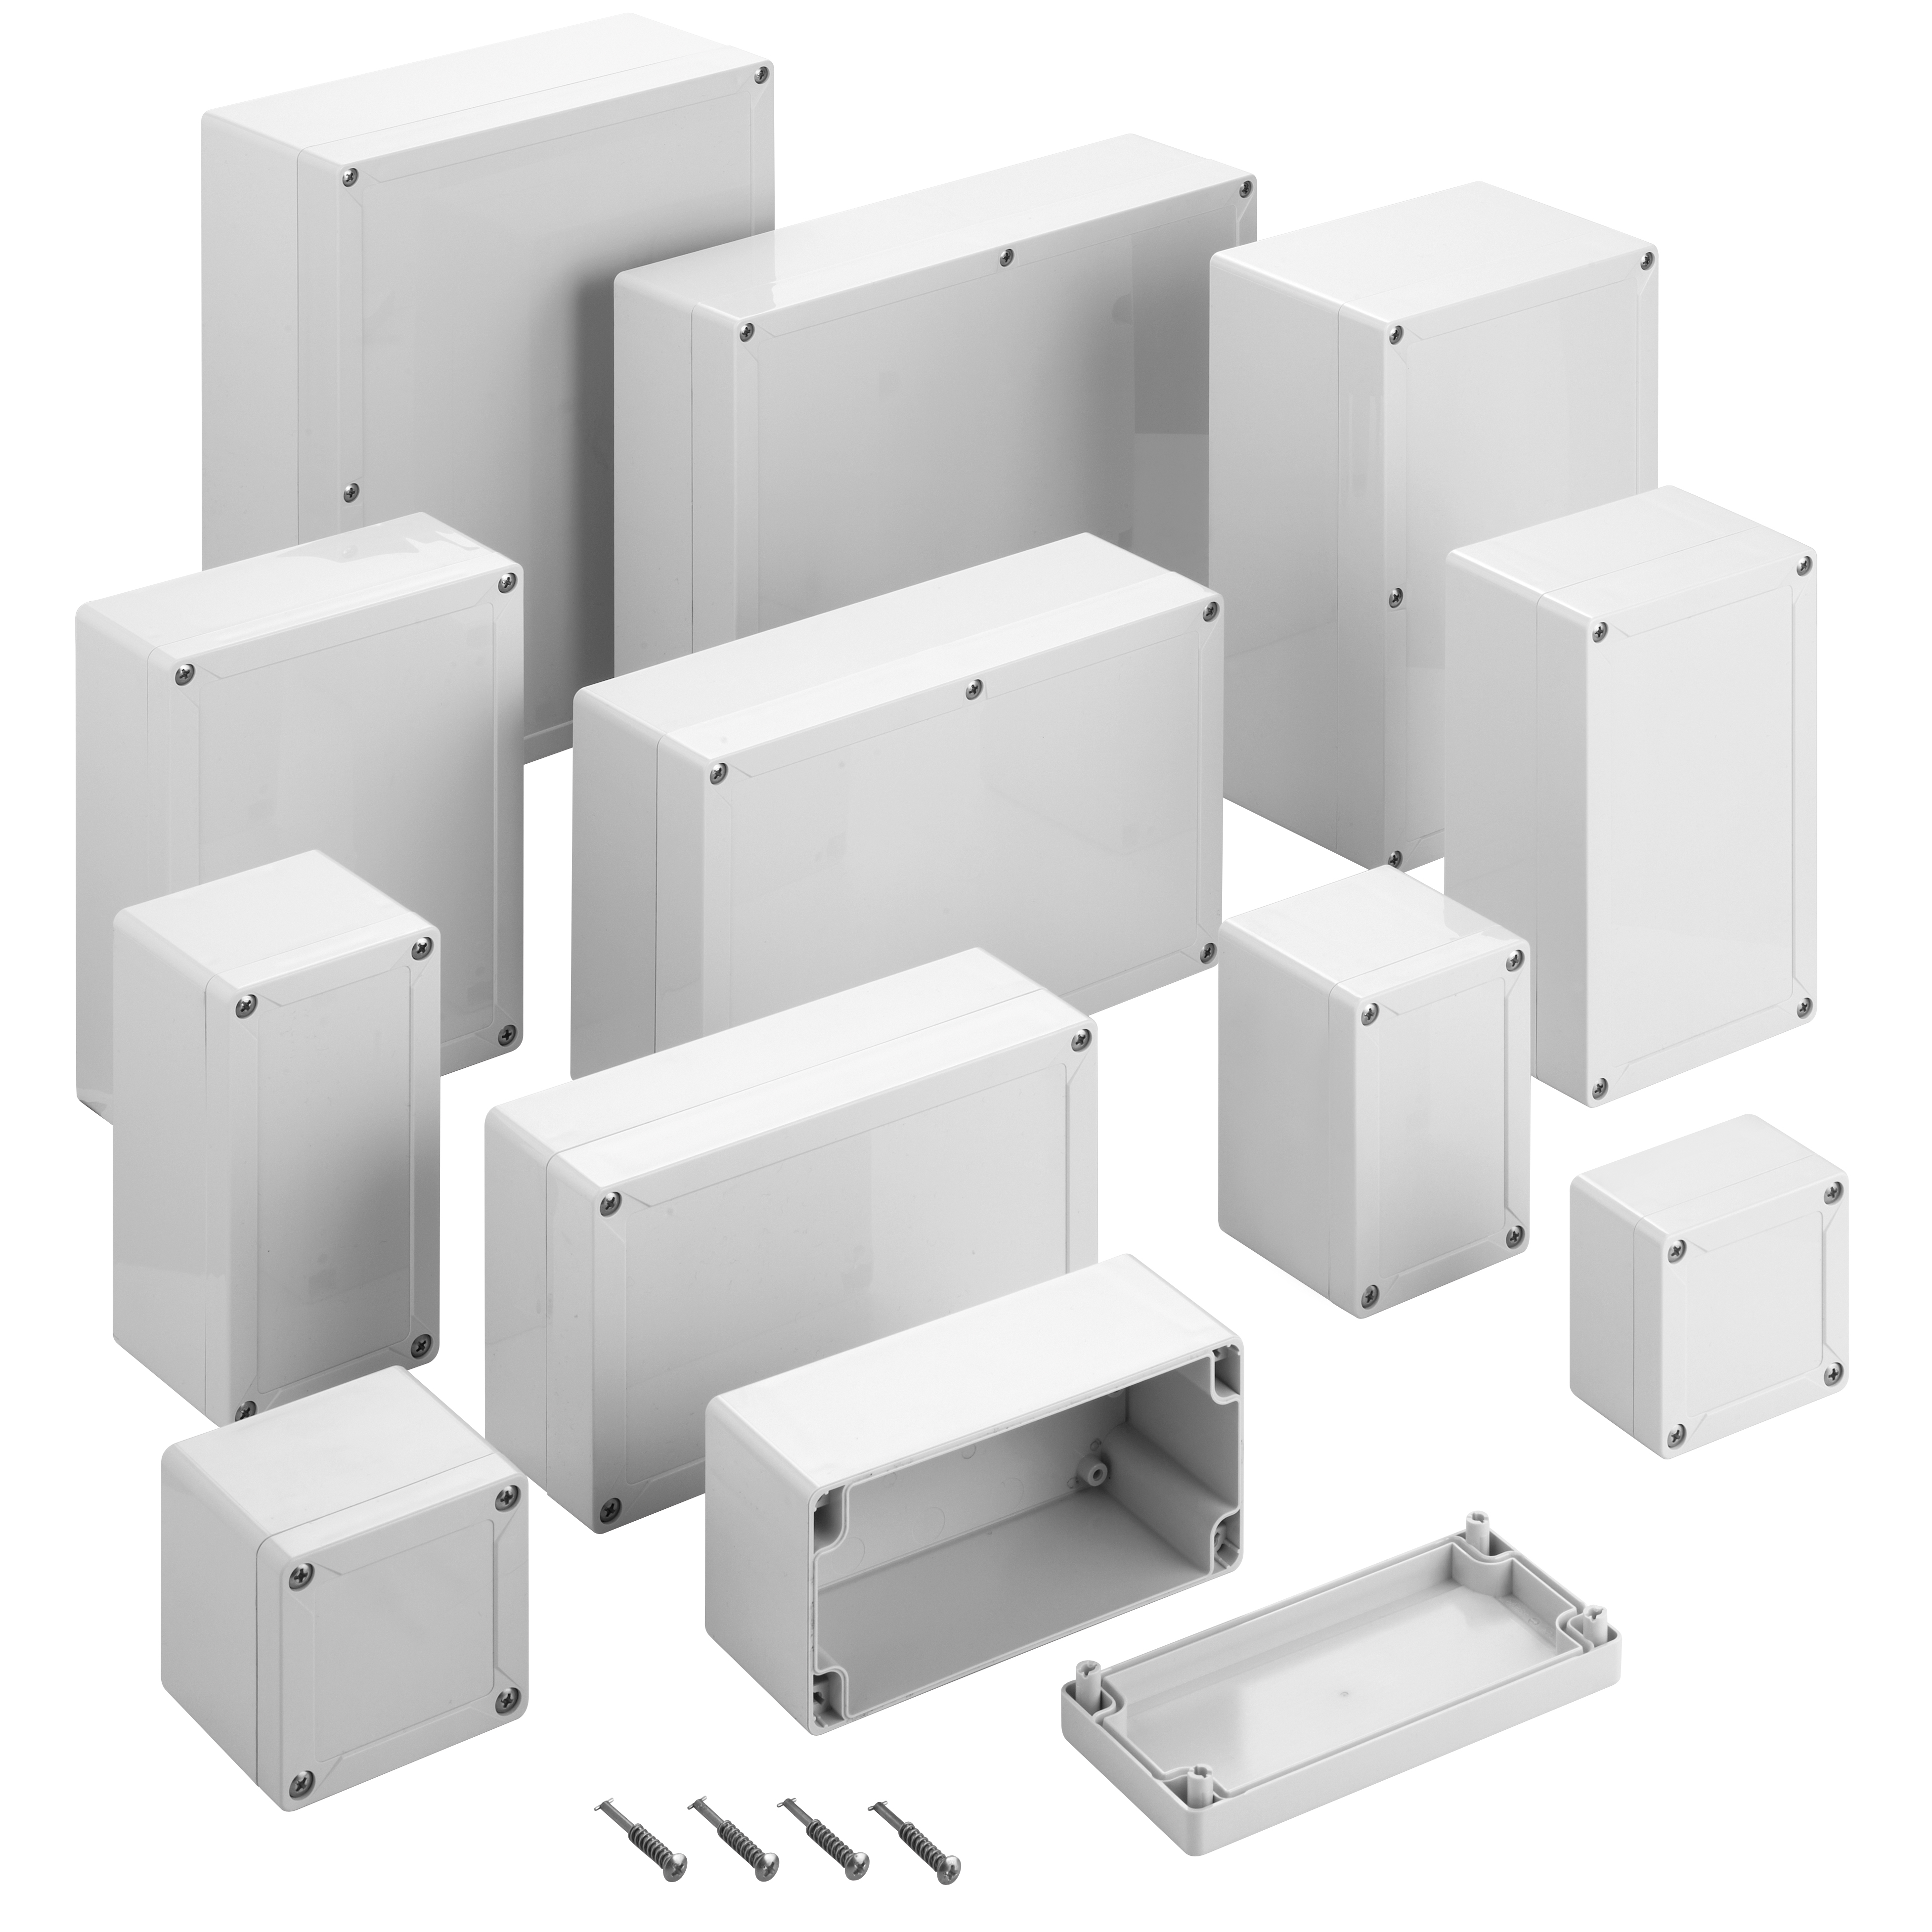 TG industrial empty housings are available in nine different versions.